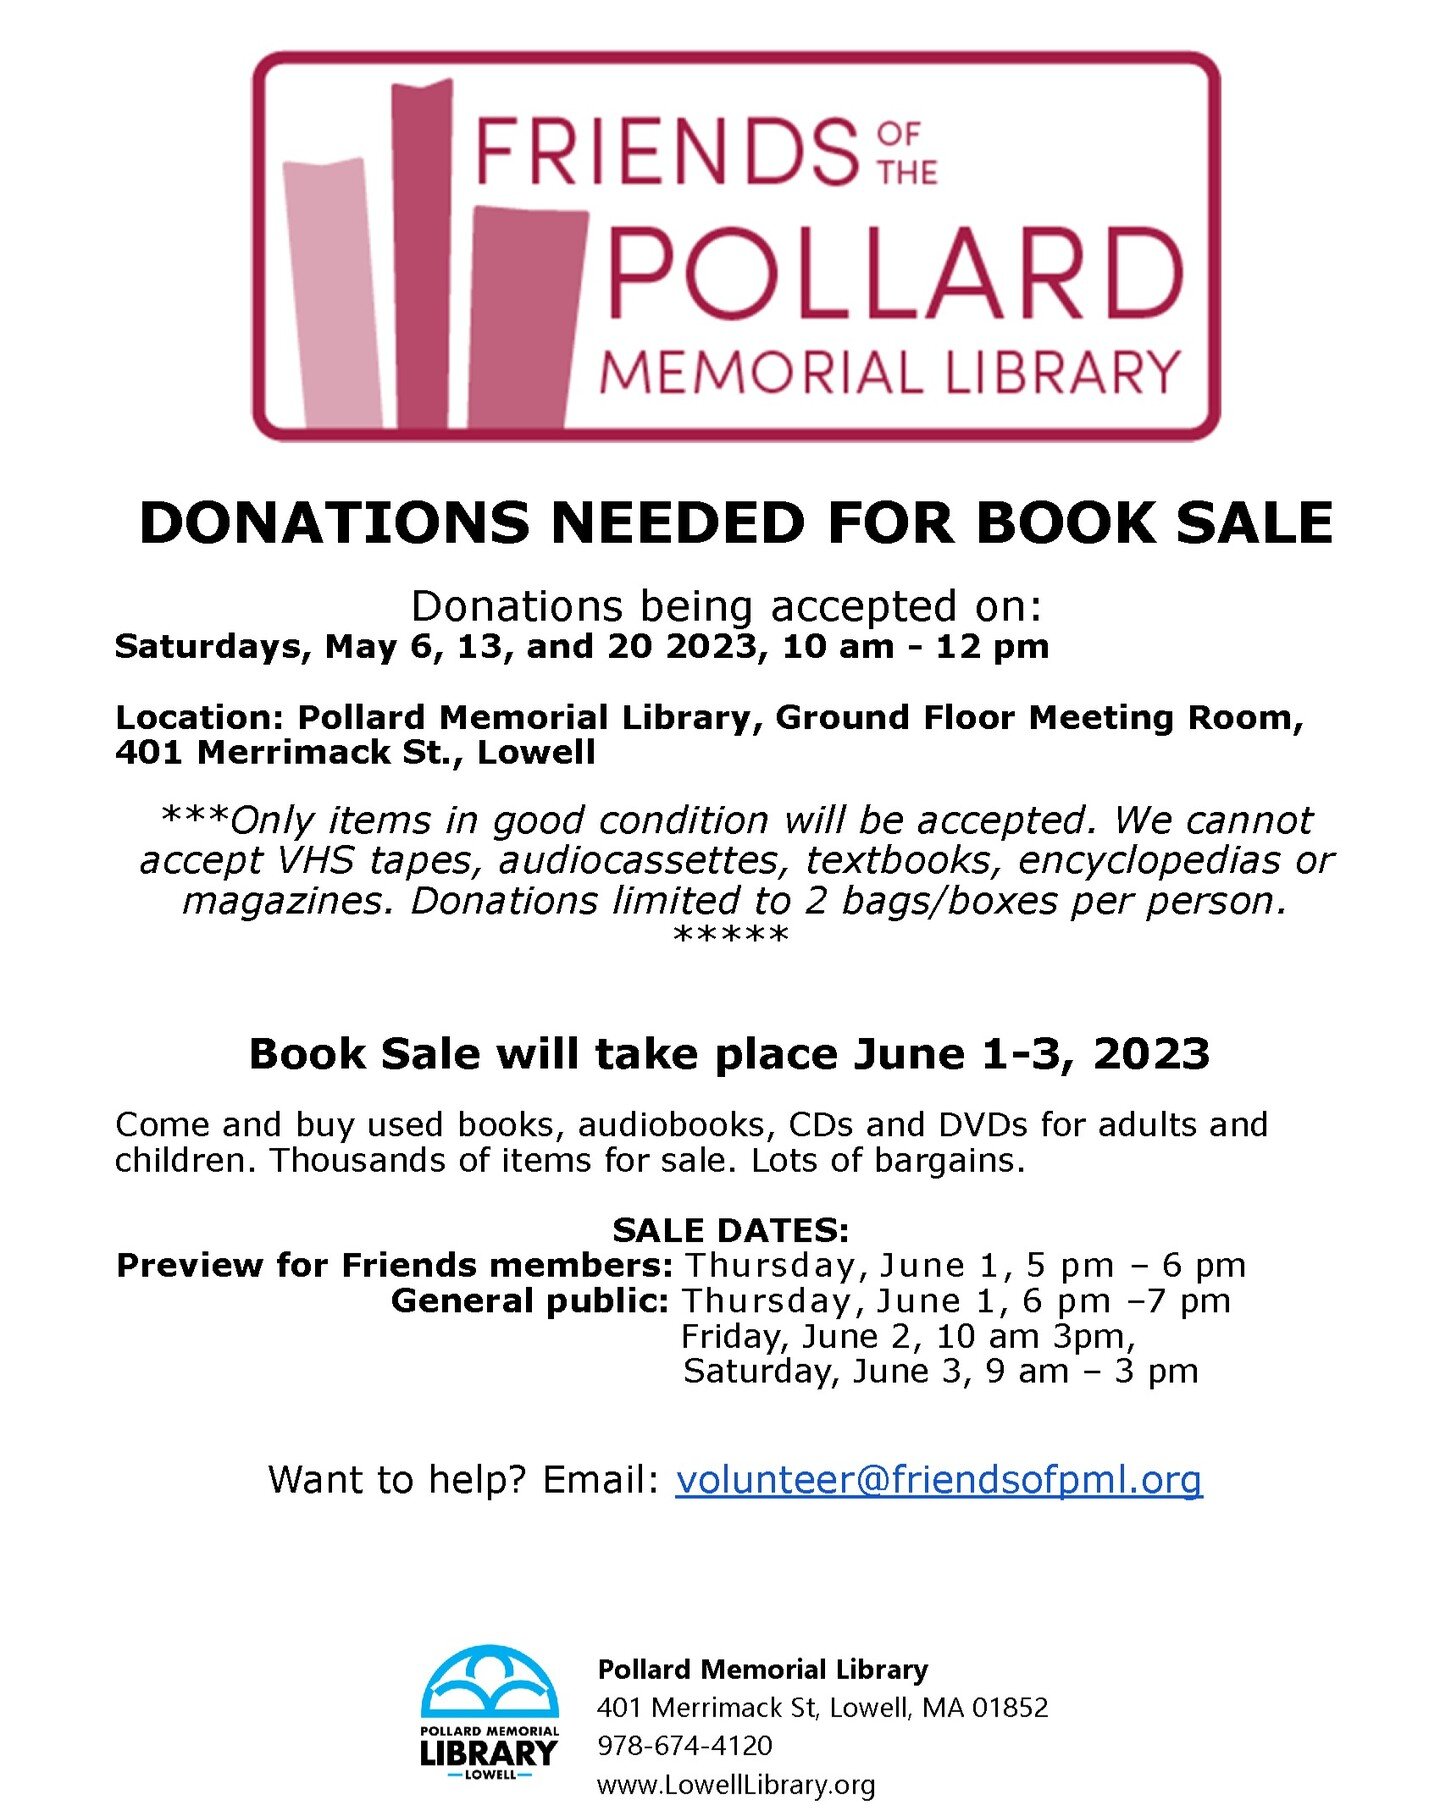 CALAA is now a Friend of the Pollard Memorial Library!

Have some books lying around?
Consider making a donation for the Friends of the Pollard Memorial Library for a book sale from June 1-3!